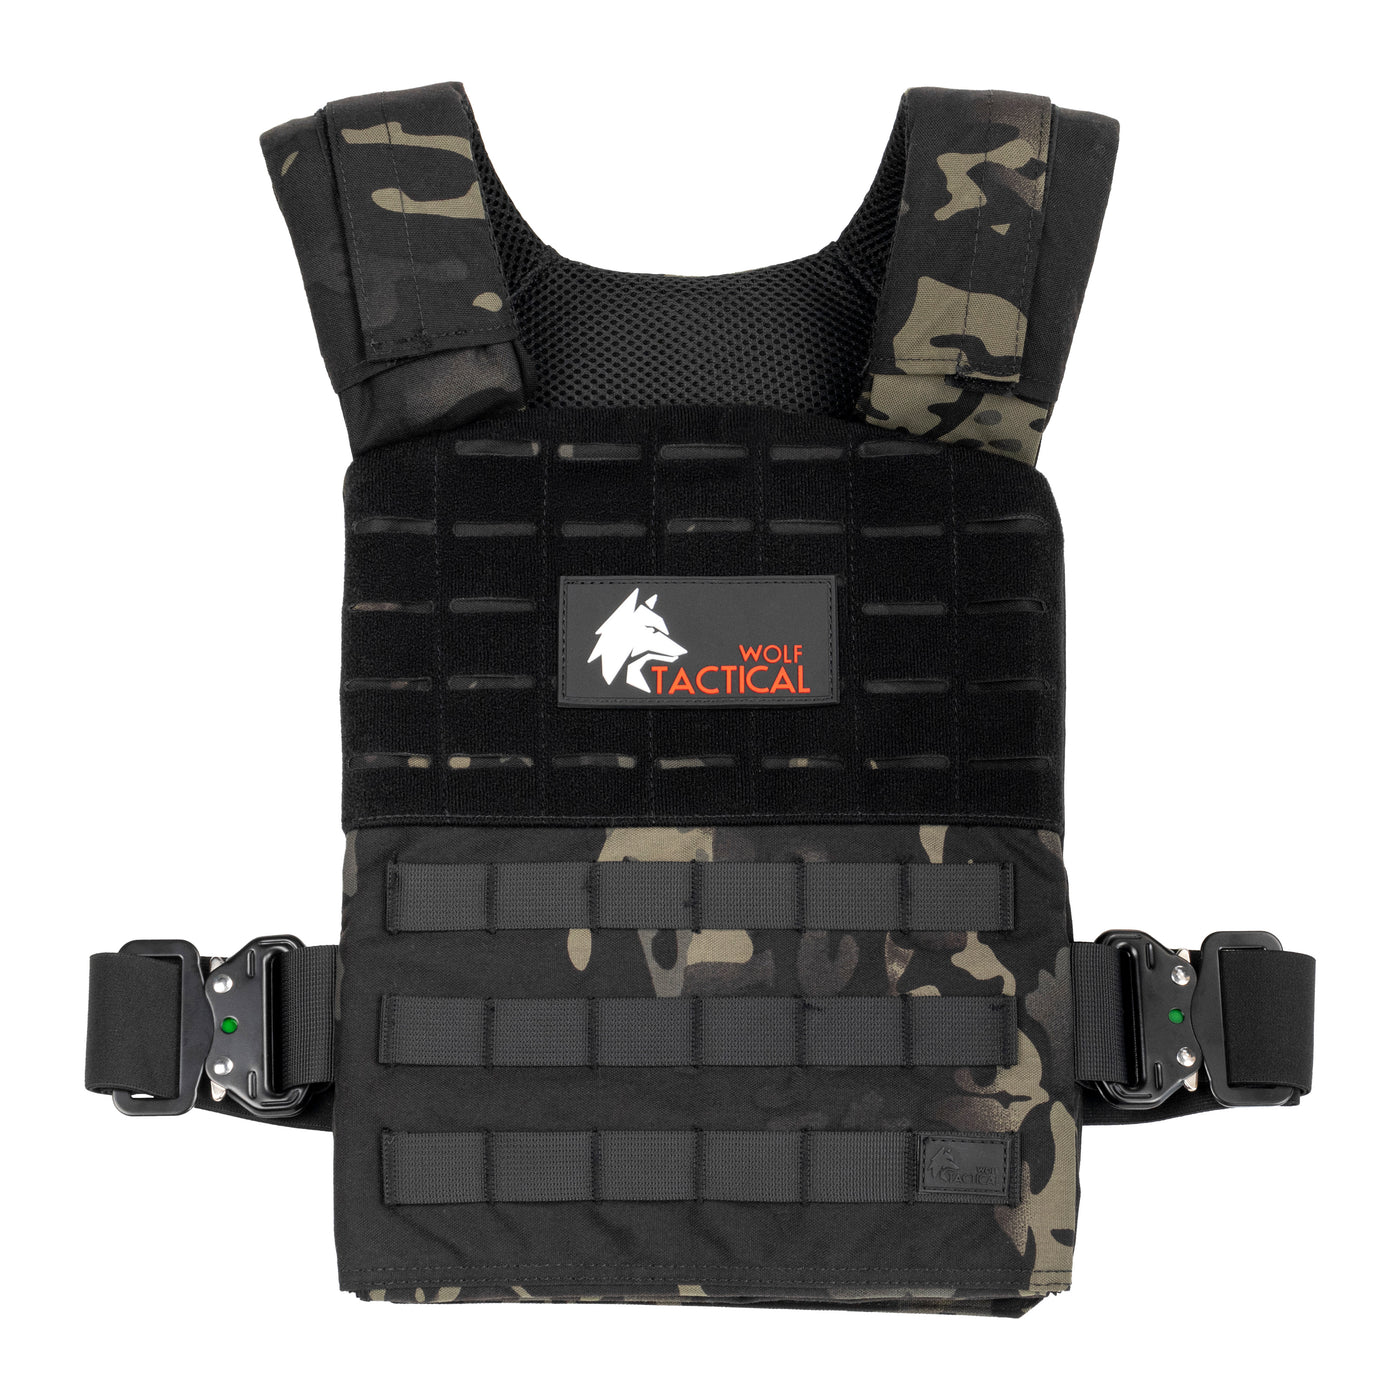 Quick-Release Weighted Vest